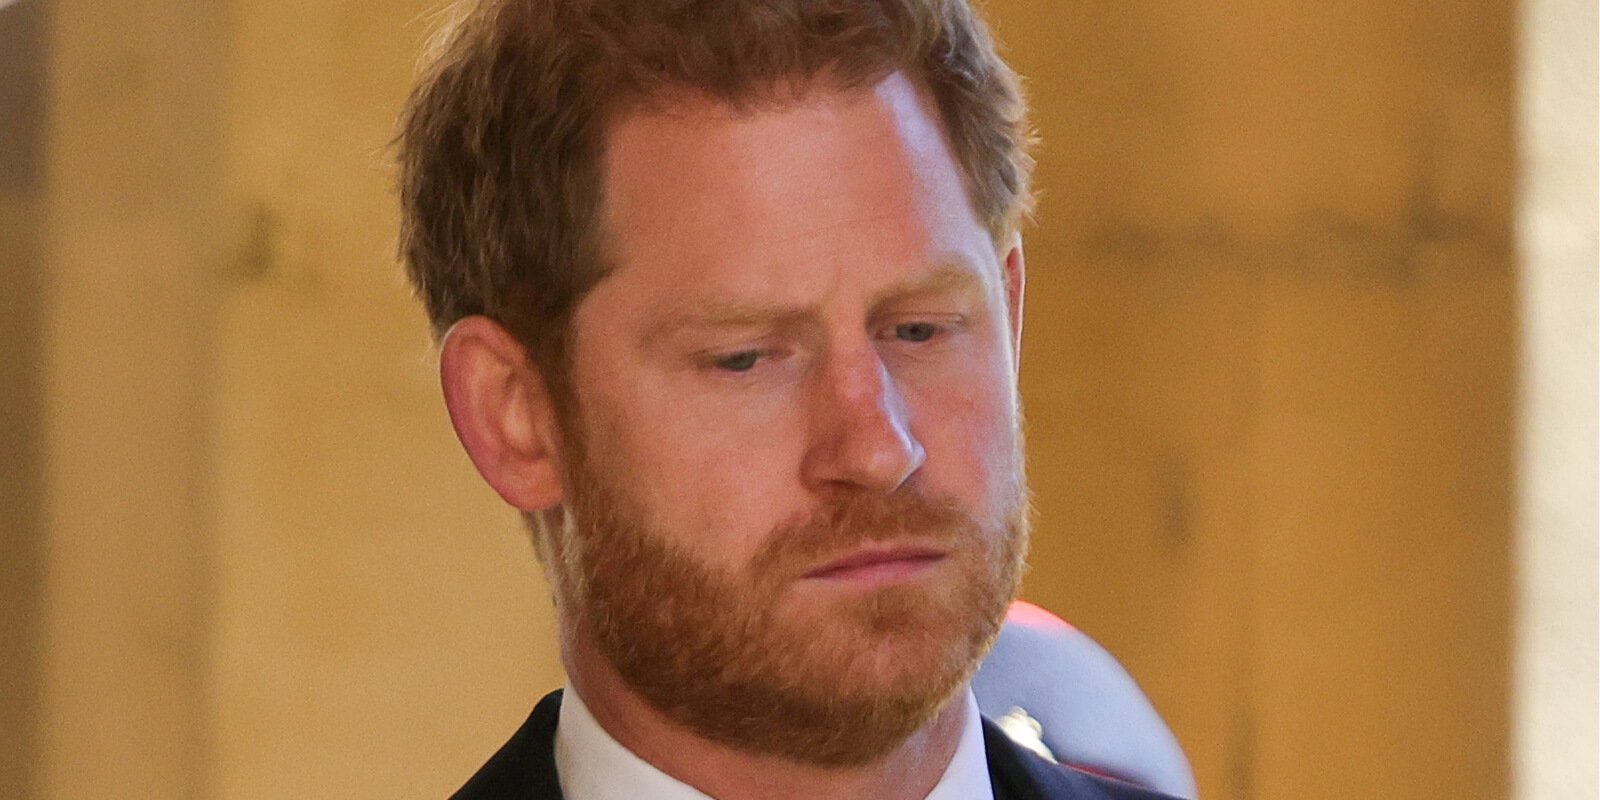 Prince Harry at during the Ceremonial Procession during the funeral of Prince Philip, Duke of Edinburgh at Windsor Castle on April 17, 2021.